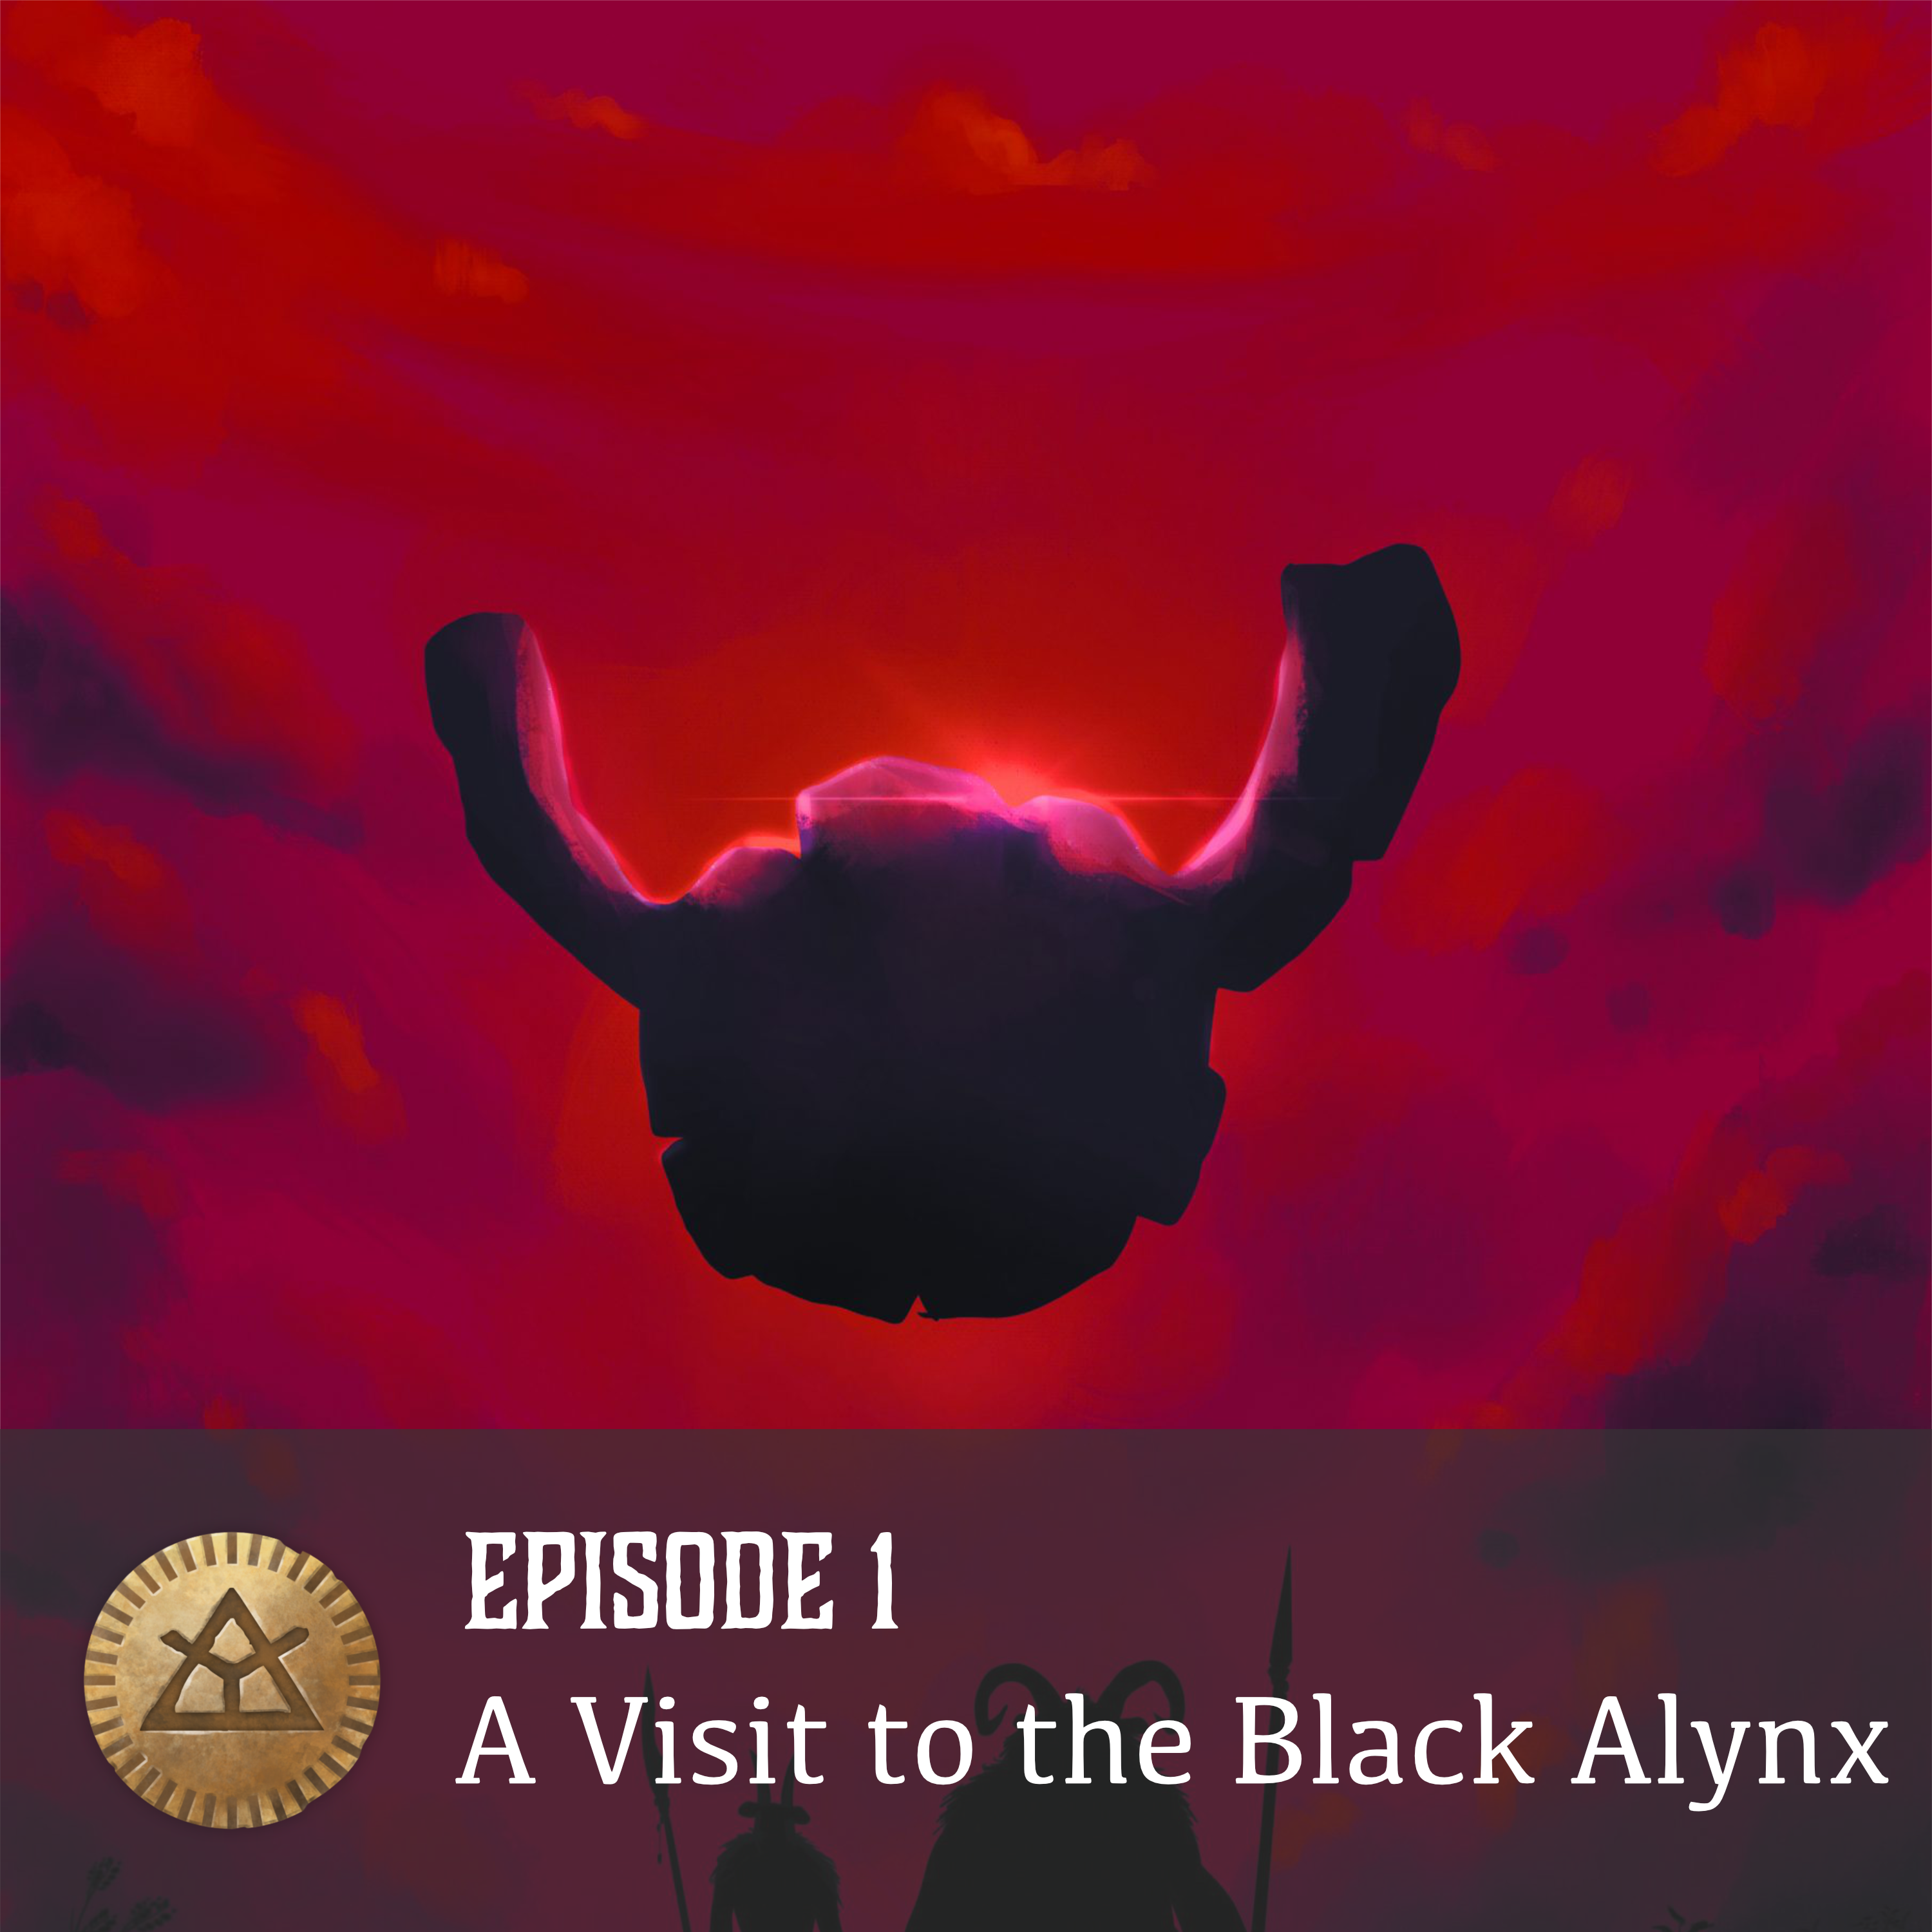 Episode 1: A Visit to the Black Alynx